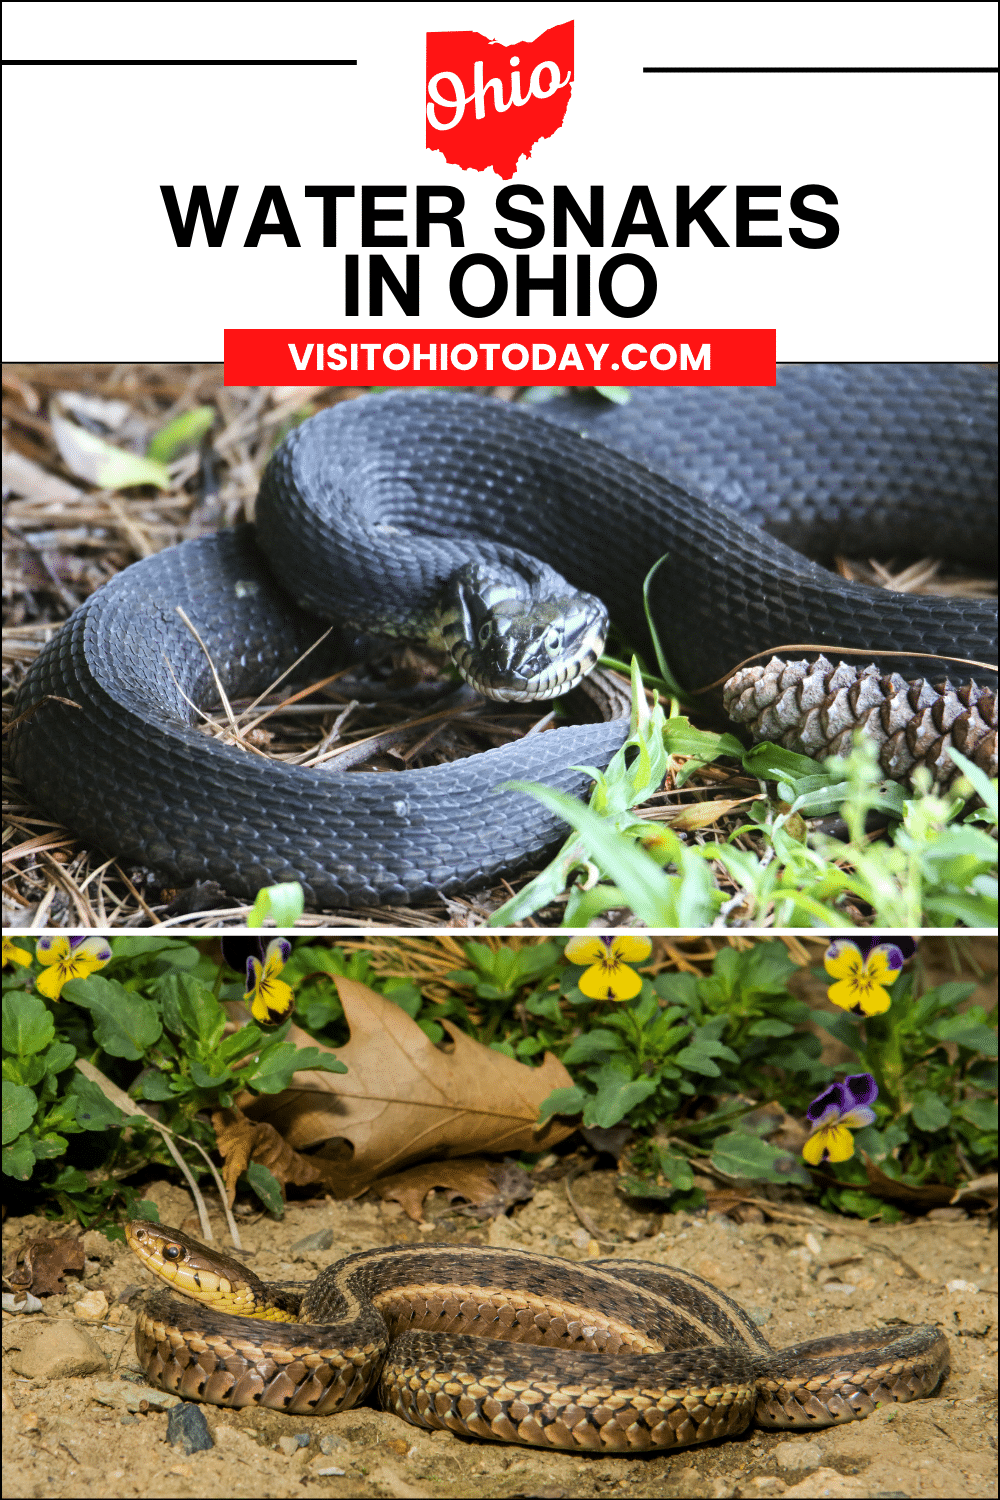 Did you know Ohio is home to seven species of water snakes? 🌊🐍 From the Northern Water Snake to the Queen Snake, each has its own story to tell. Remember, while these snakes are non-venomous, they may bite if agitated. Best practice? Give them space and admire from afar! Learn more fascinating facts about Ohio's water snakes today. #OhioWildlife #WaterSnakes #NatureFacts